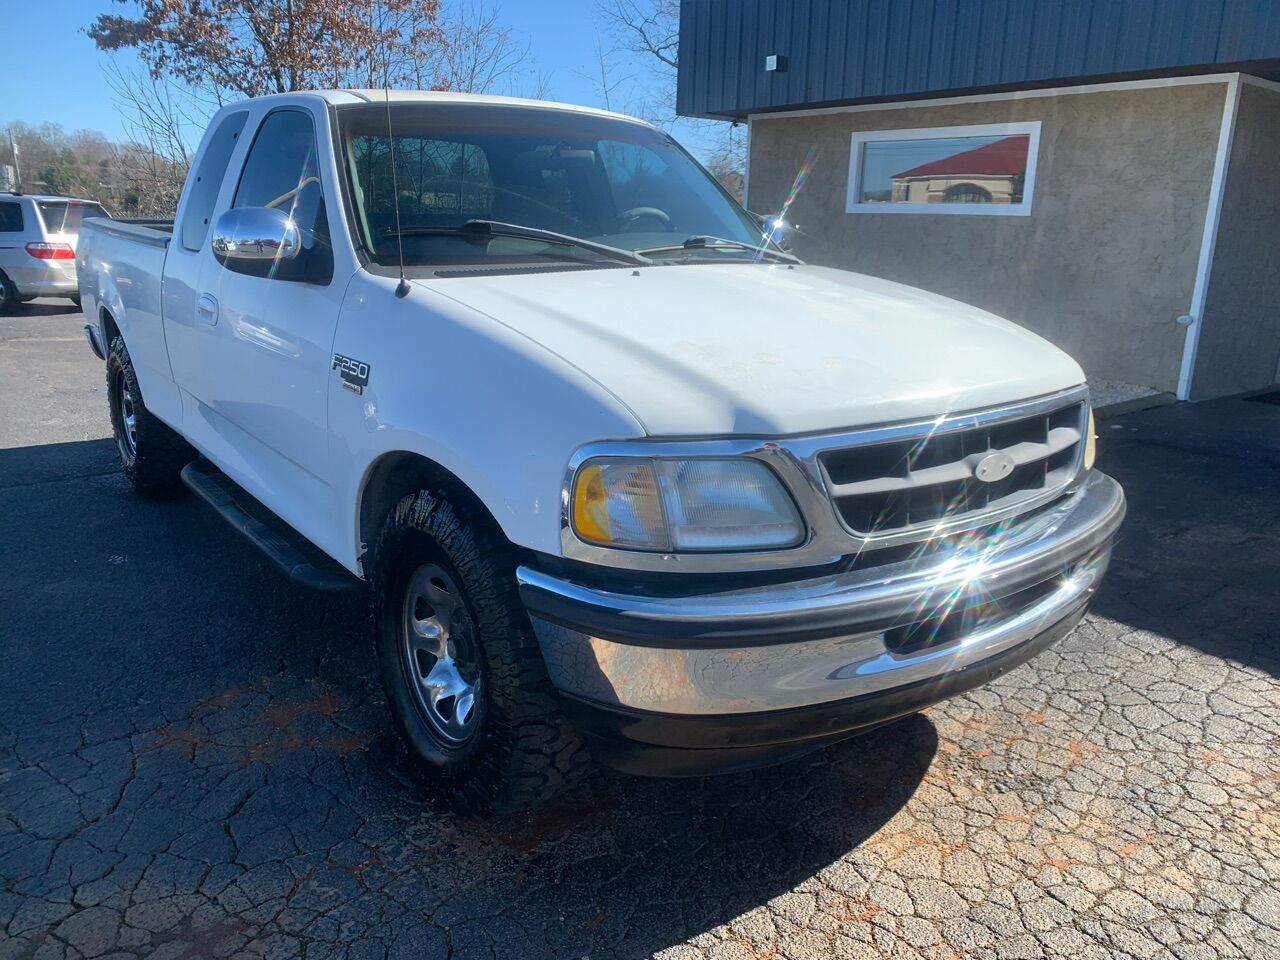 1998 Ford F-250 For Sale - Carsforsale.com®